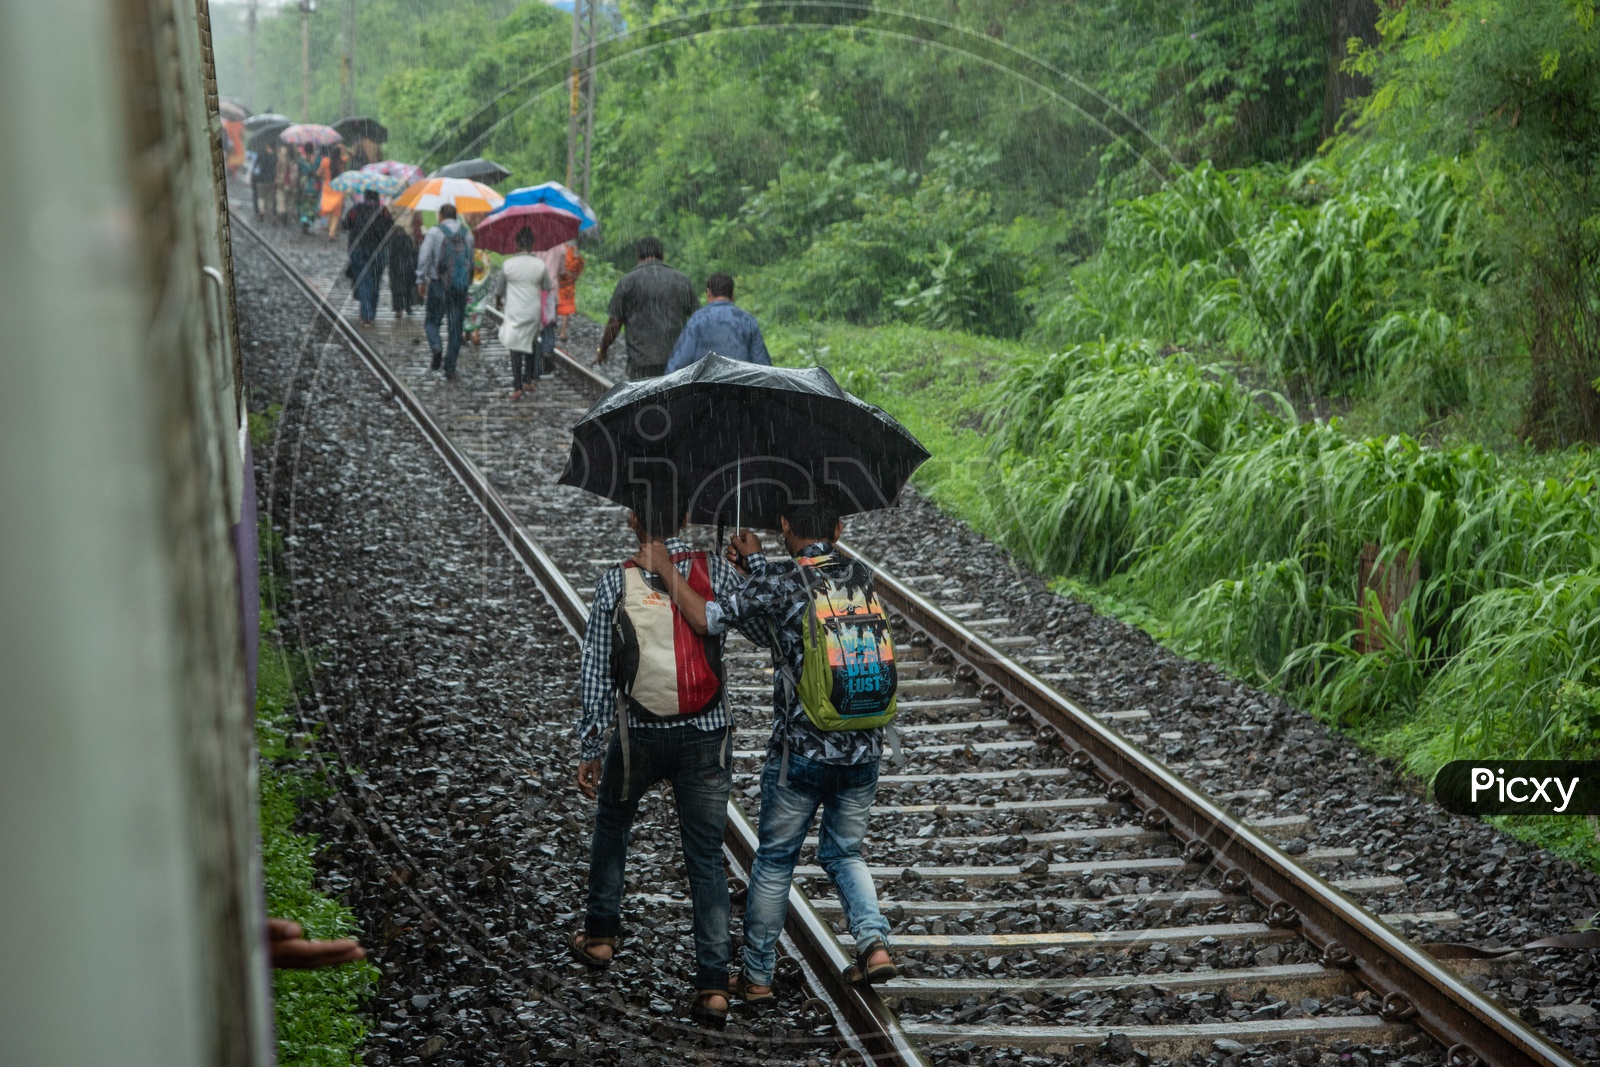 Passengers take to the tracks to reach the nearest station as train breaks down